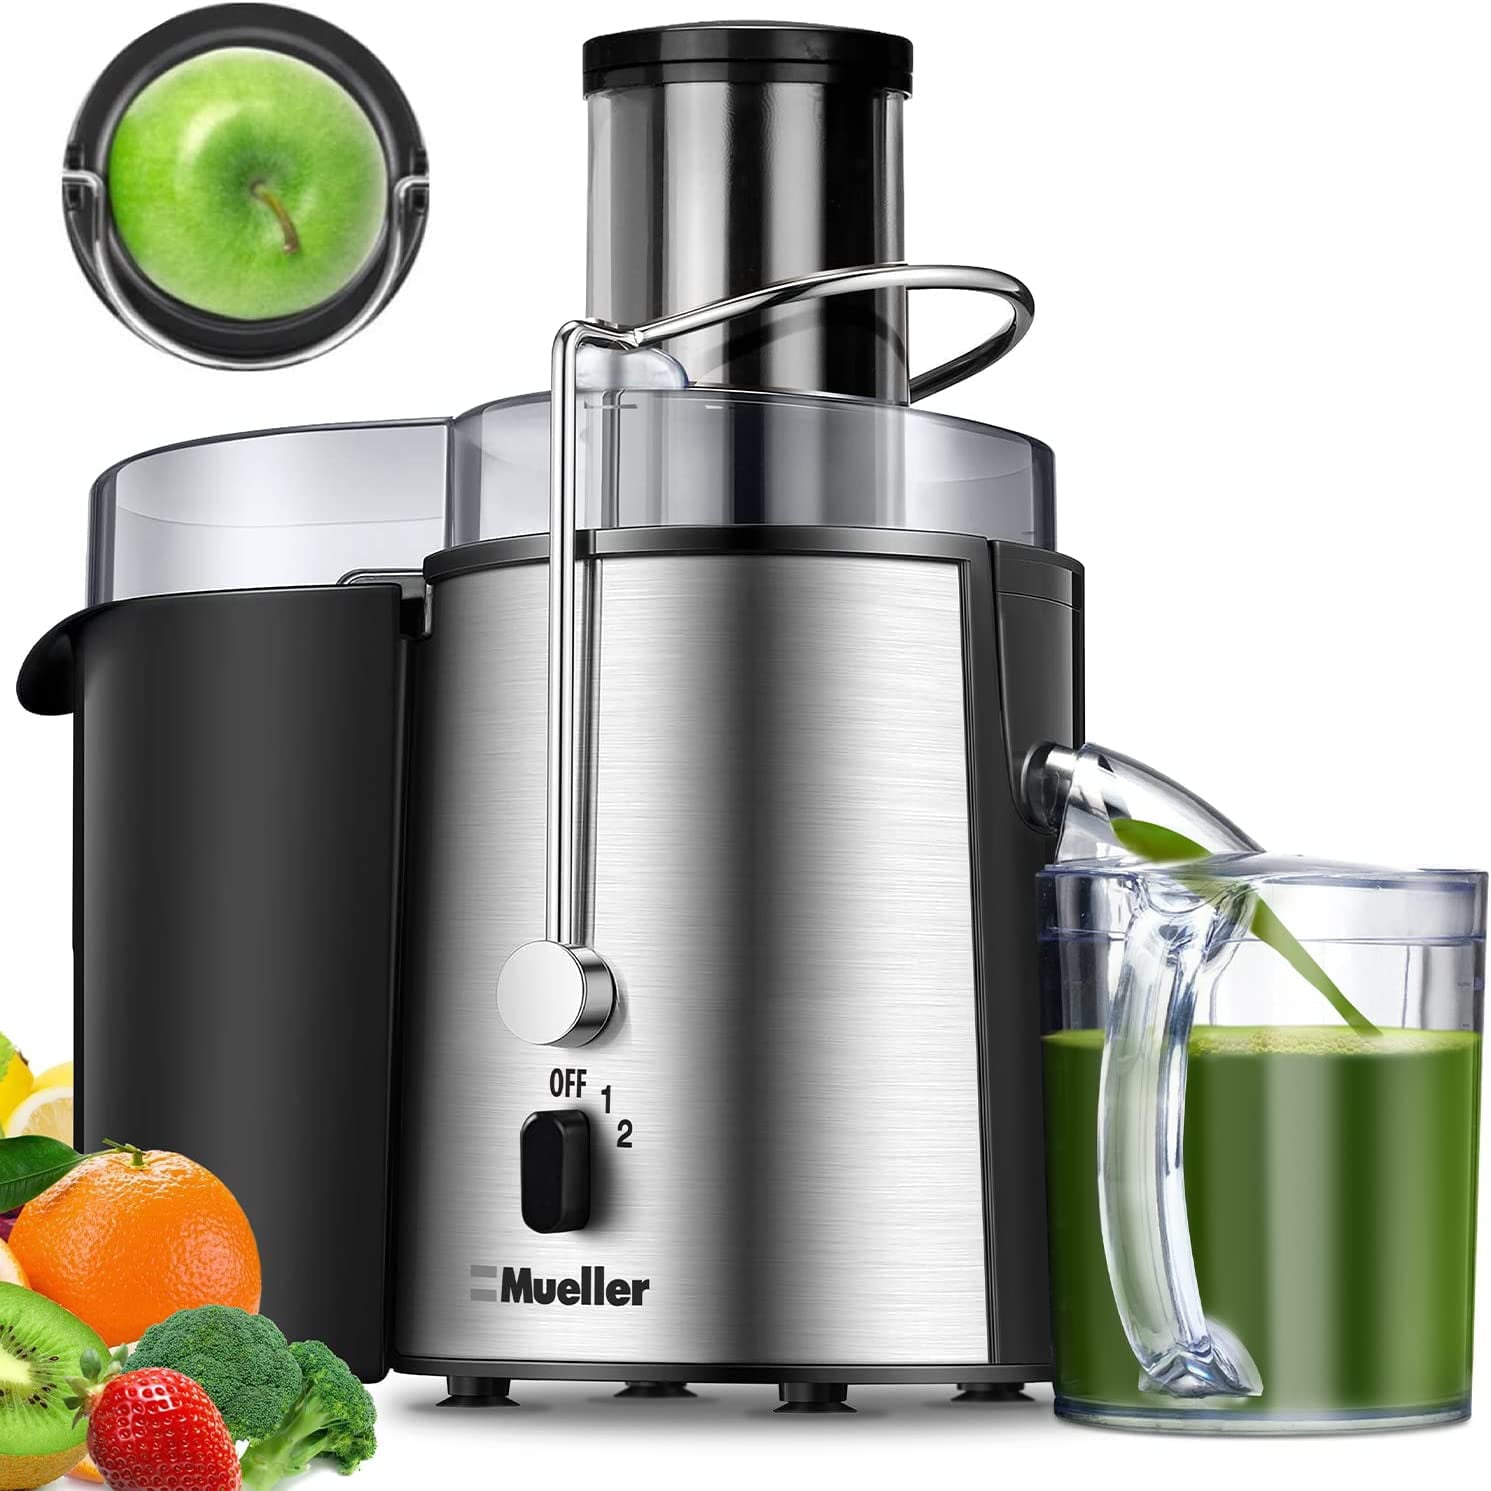 Mueller Juicer Ultra Power, Easy Clean Extractor Press Centrifugal Juicing Machine, Wide 3" Feed Chute for Whole Fruit Vegetable